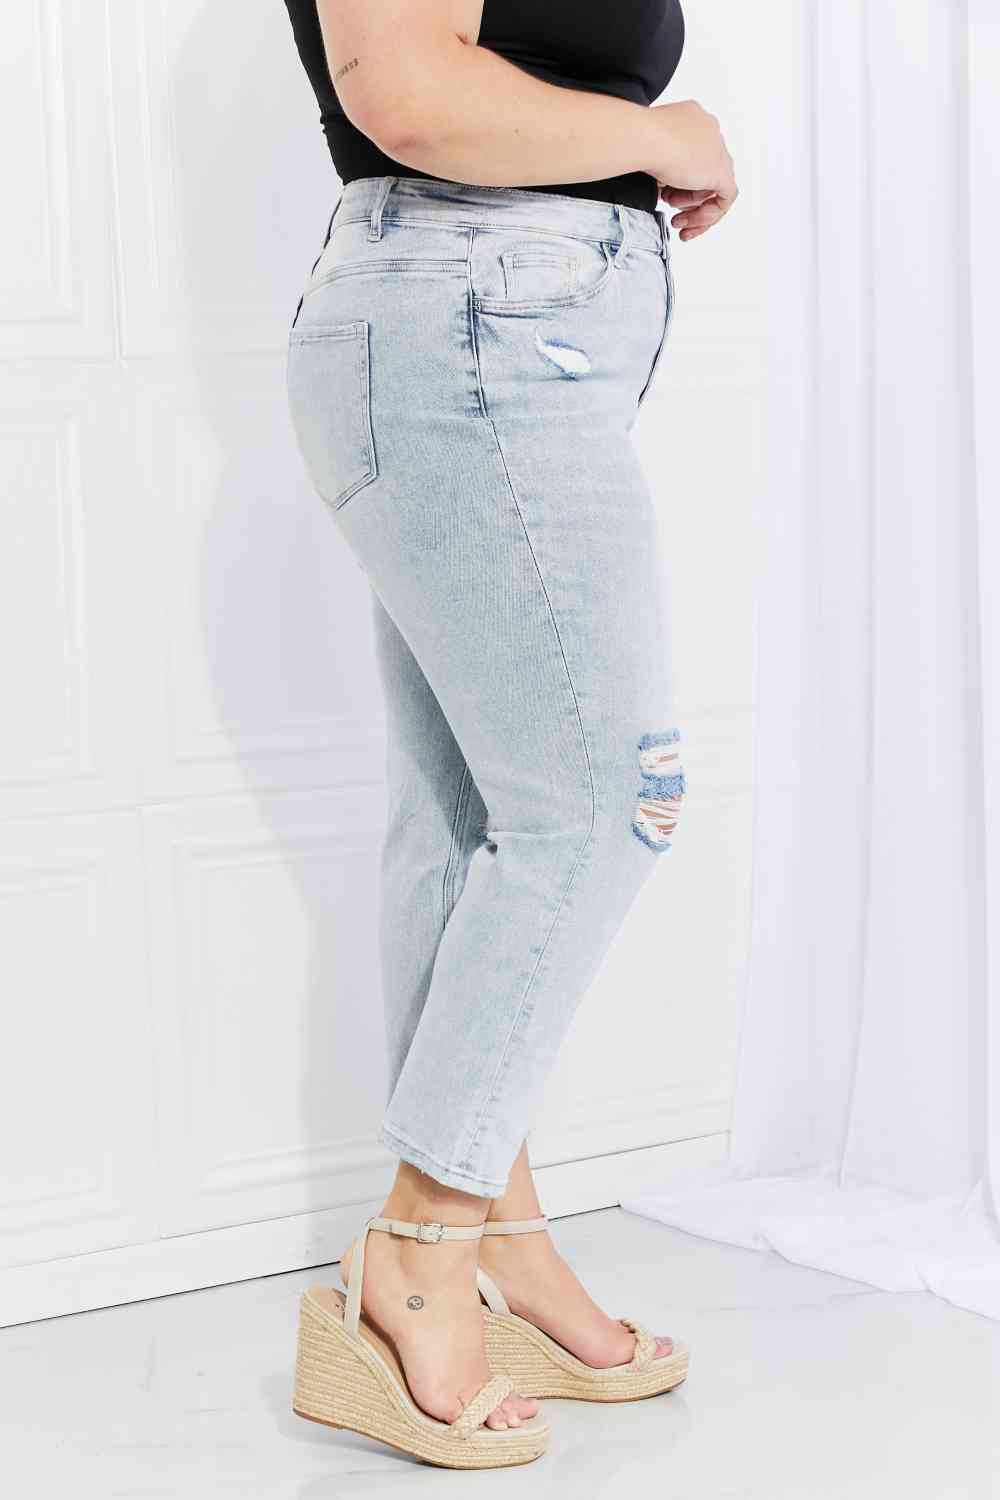 Candy Crush Jeans